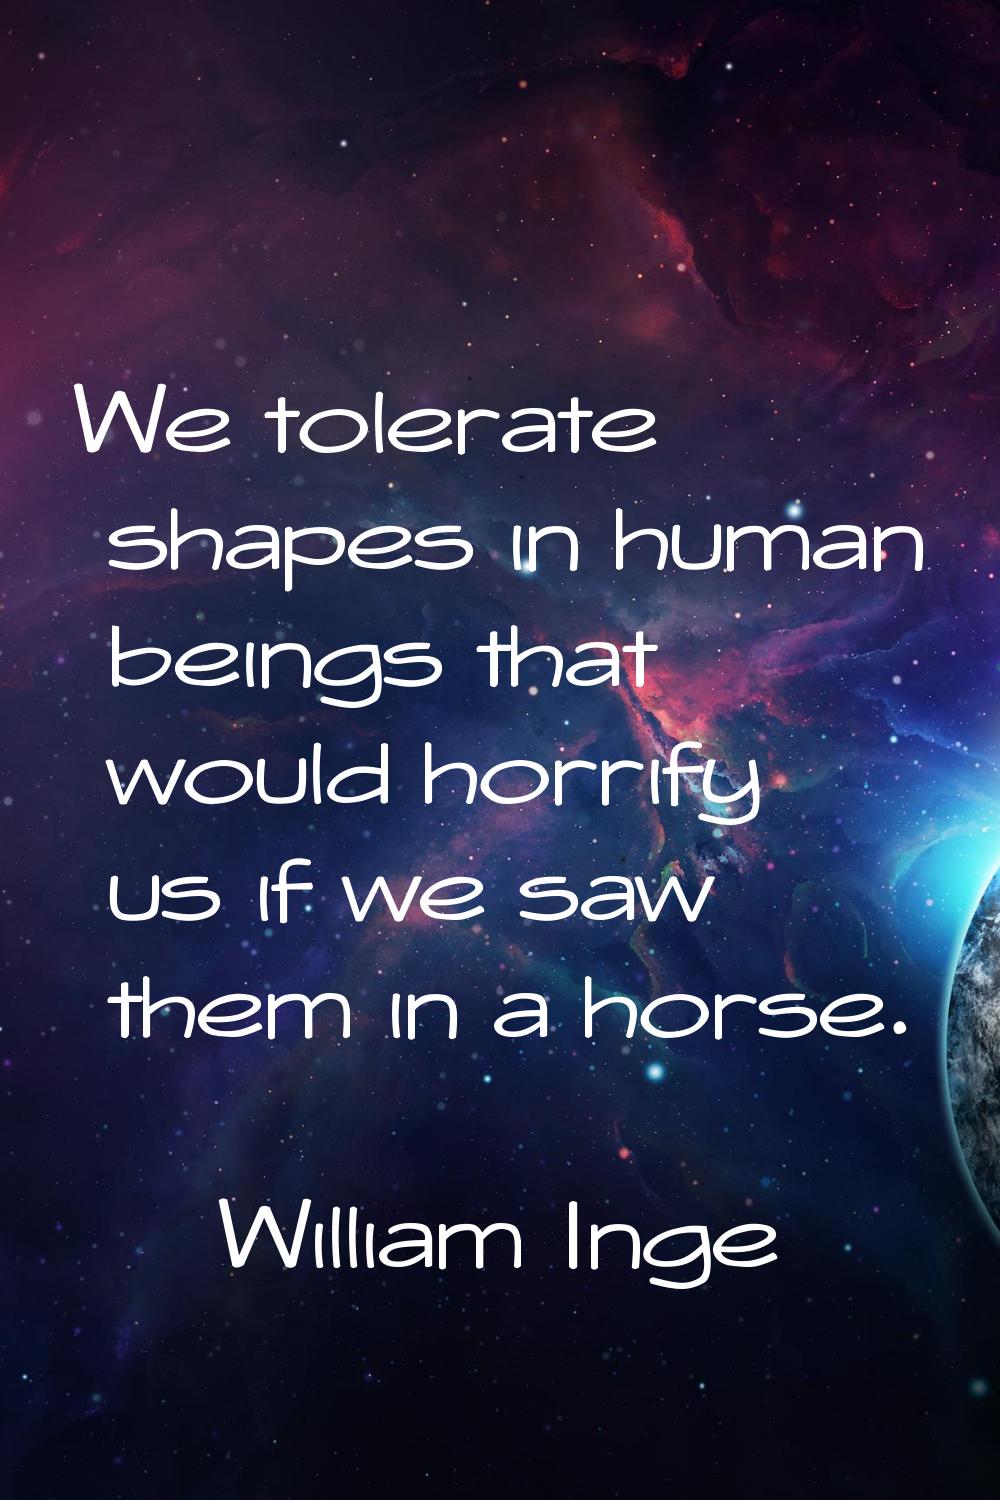 We tolerate shapes in human beings that would horrify us if we saw them in a horse.